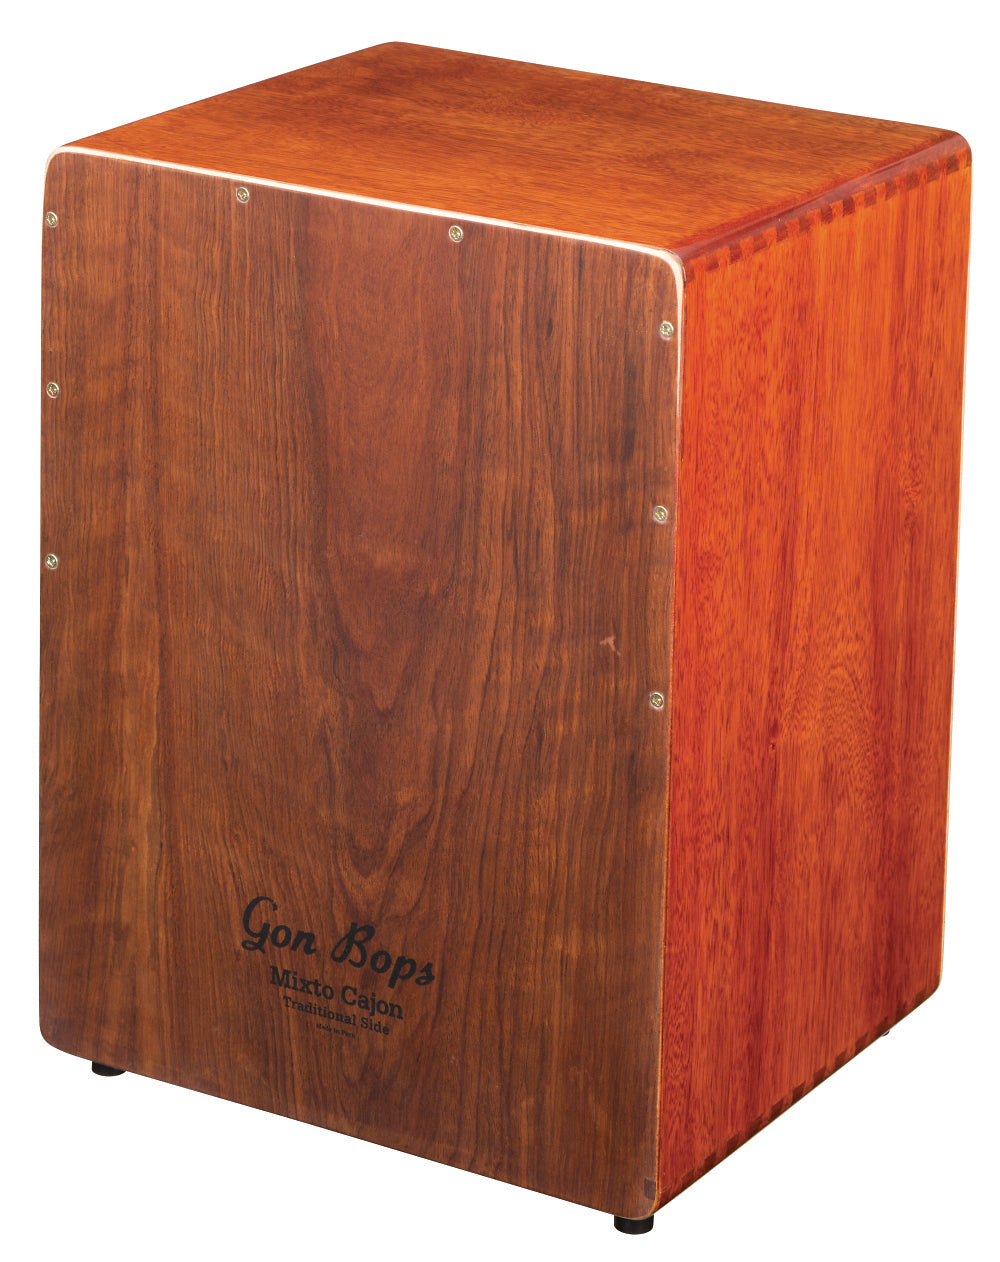 Gon Bops Mixto Cajon Drum Natural Lacquer FREE Gig Bag and Shipping | NEW | Authorized Dealer